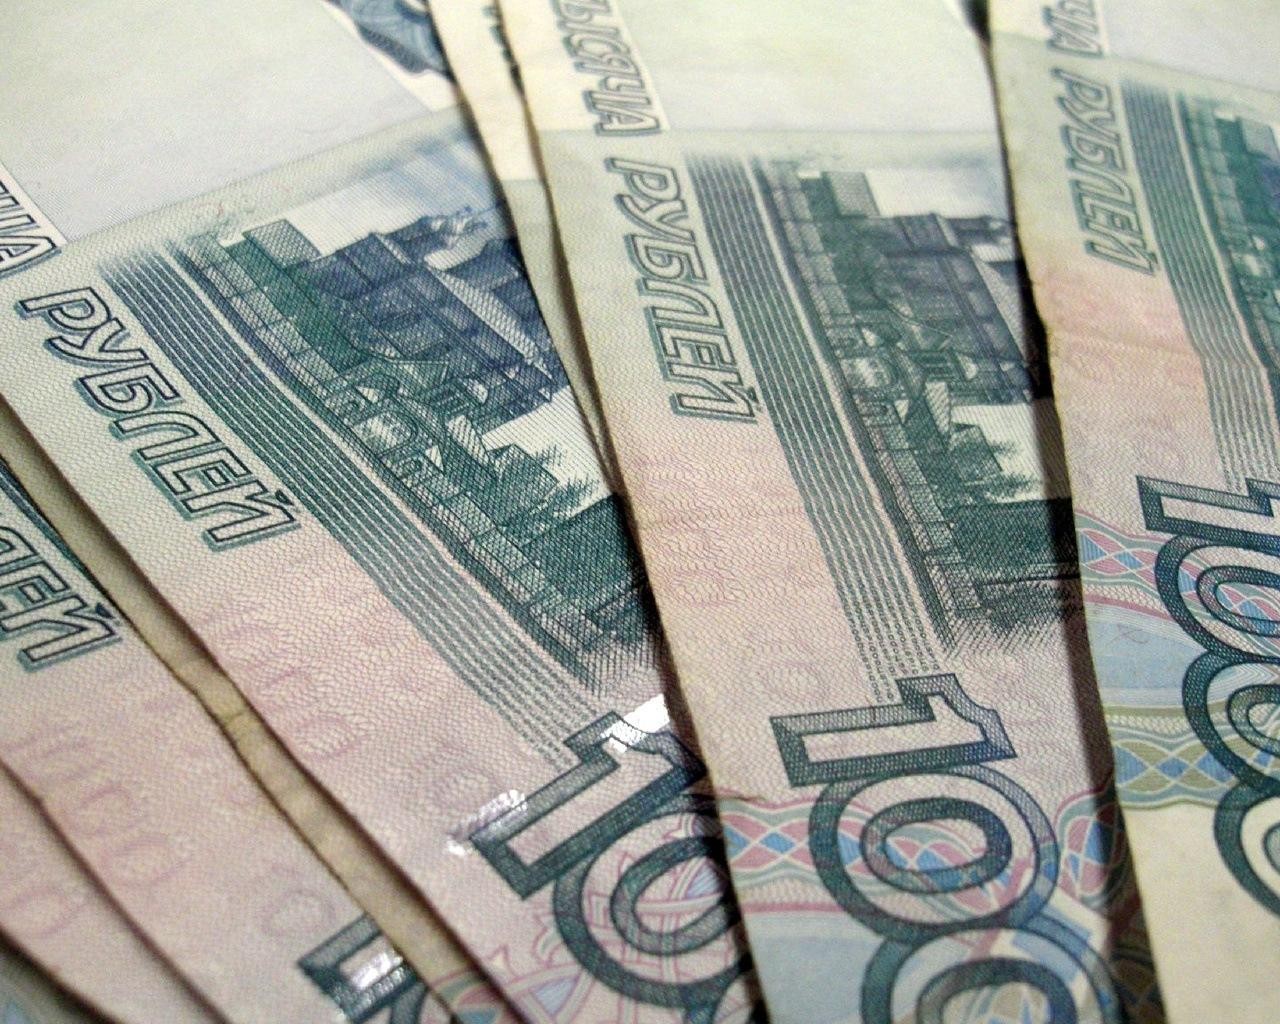 General 1280x1024 money rubles numbers paper